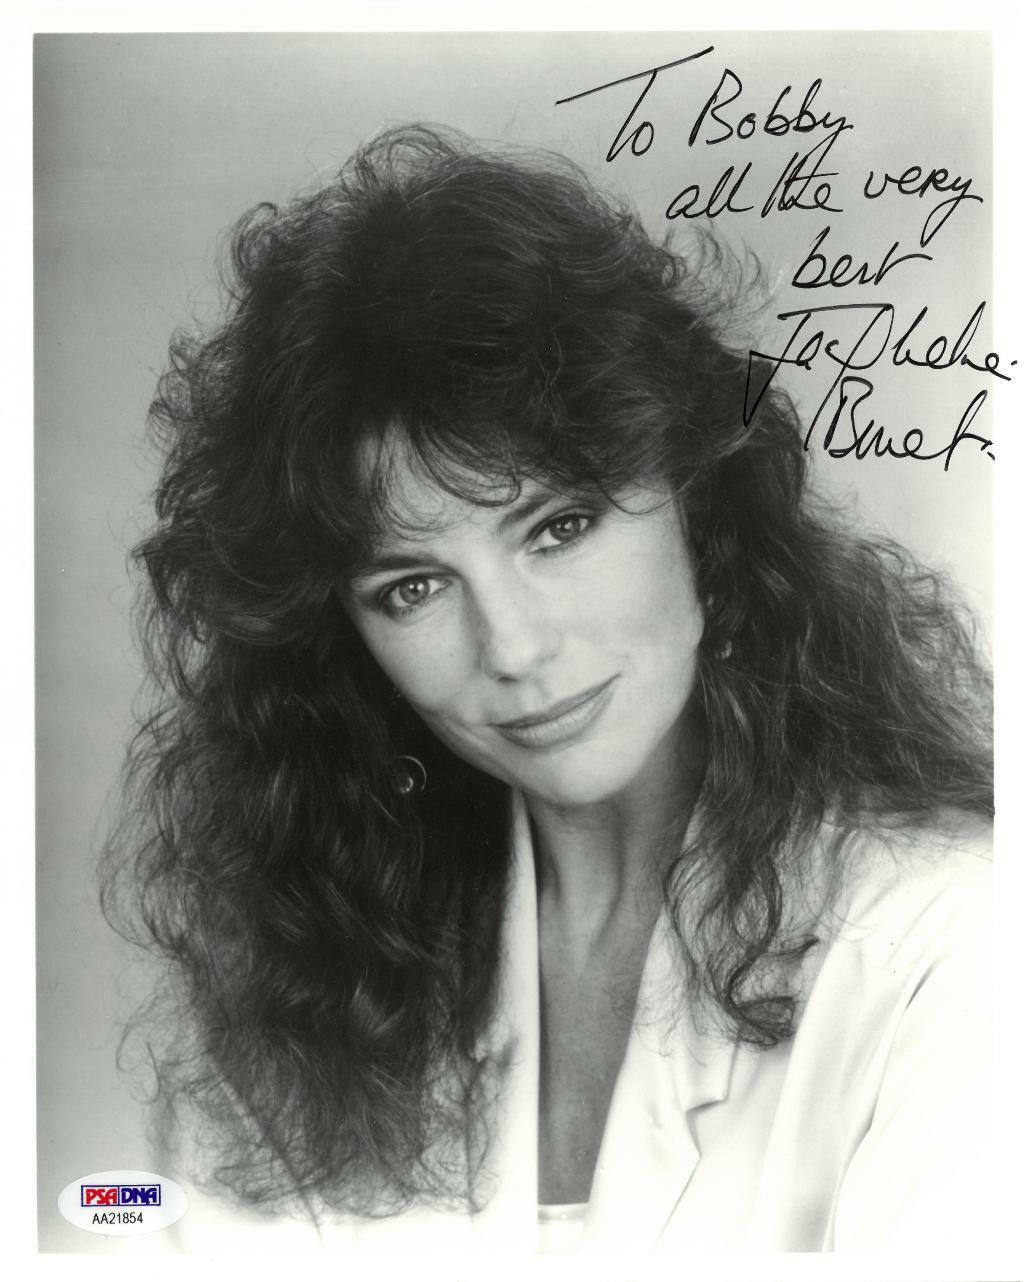 Jacqueline Bisset Signed Authentic Autographed 8x10 B/W Photo Poster painting PSA/DNA #AA21854